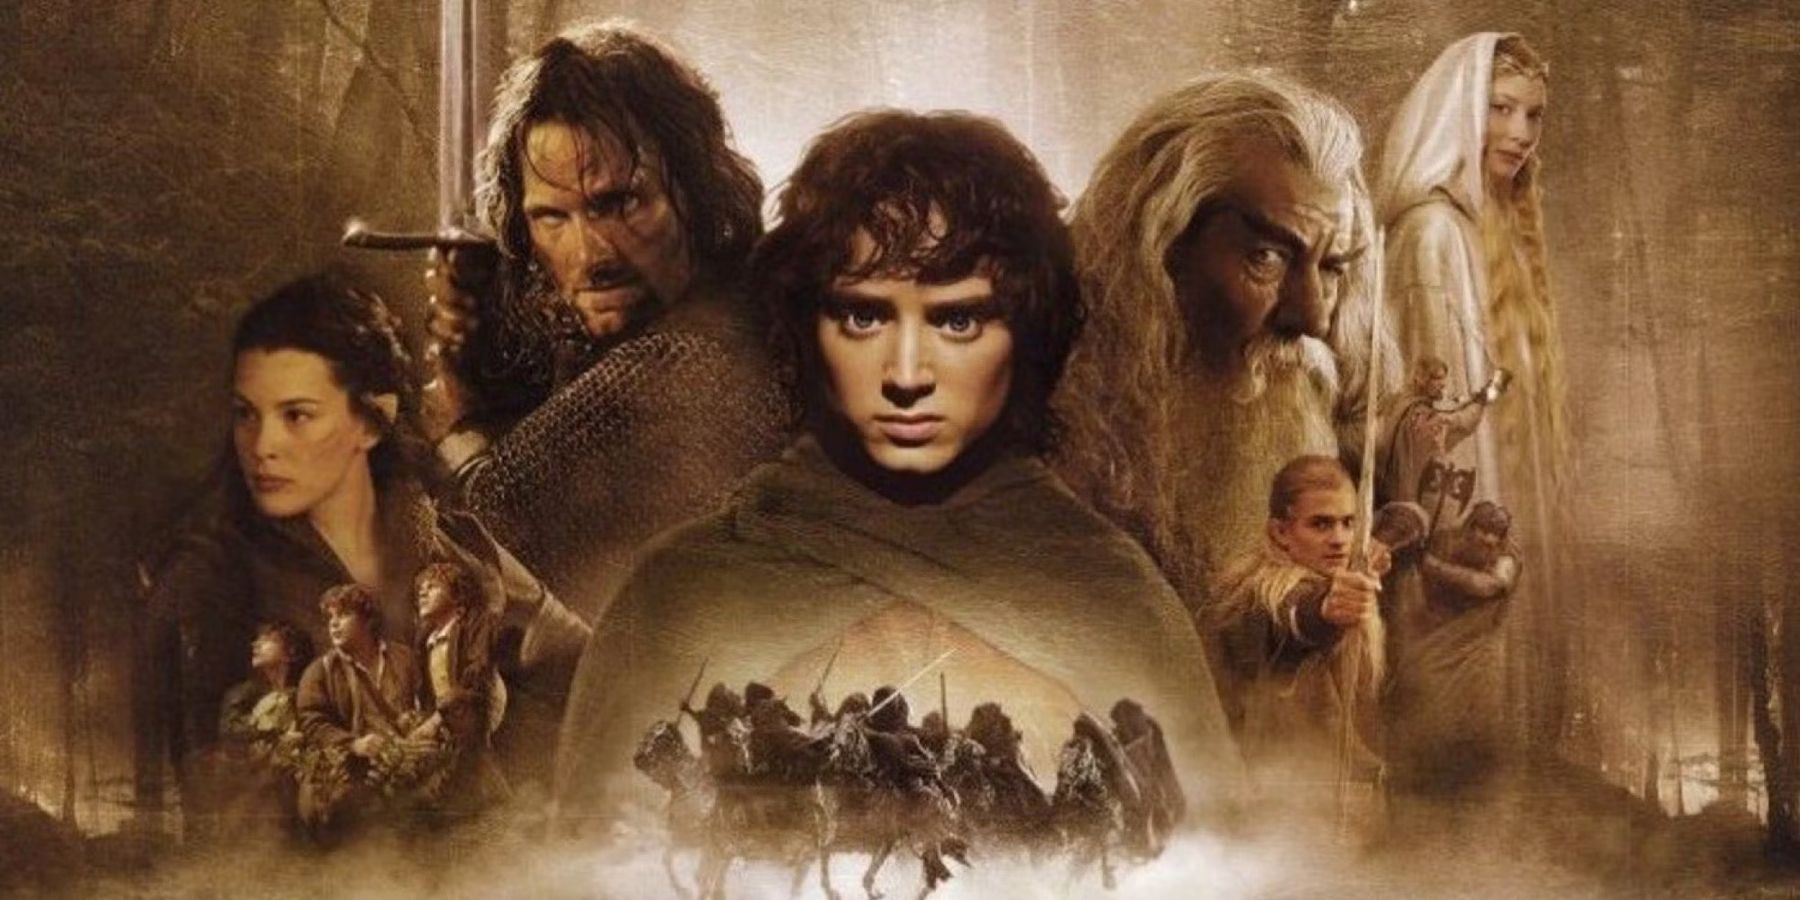 Where To Watch The Lord of the Rings: The Fellowship of the Ring